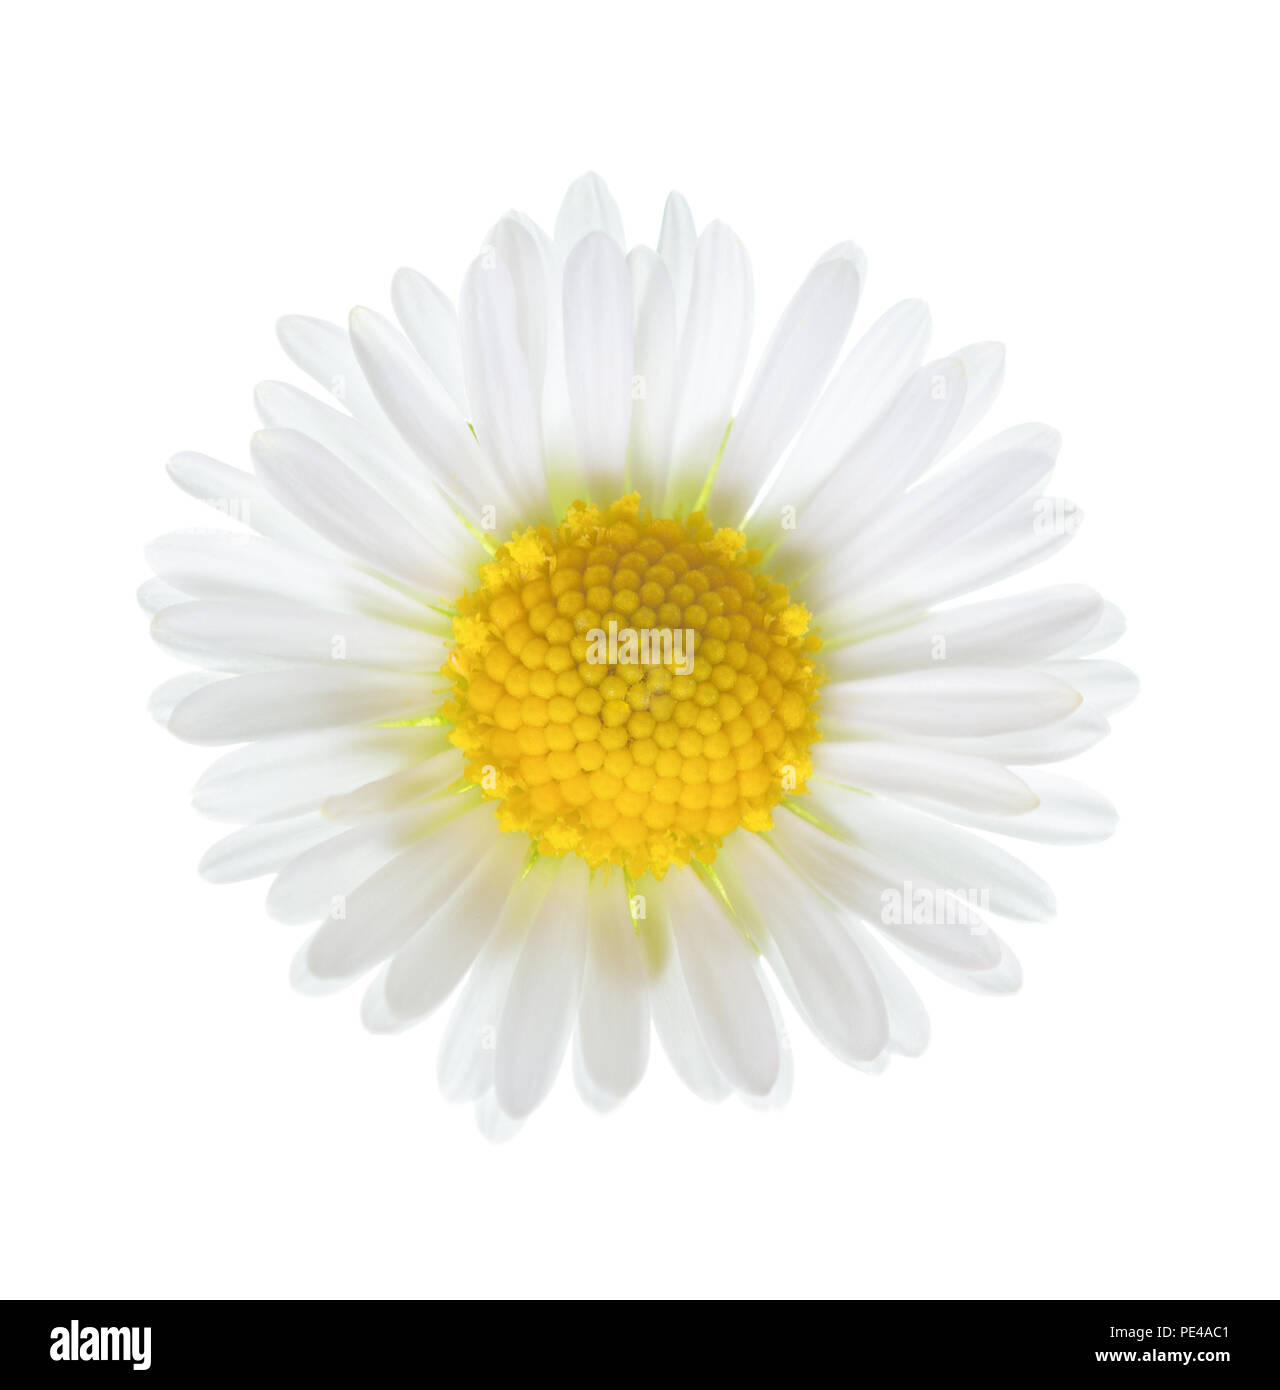 Close-up of small daisy flower (Bellis Perennis ) isolated on white background. Stock Photo